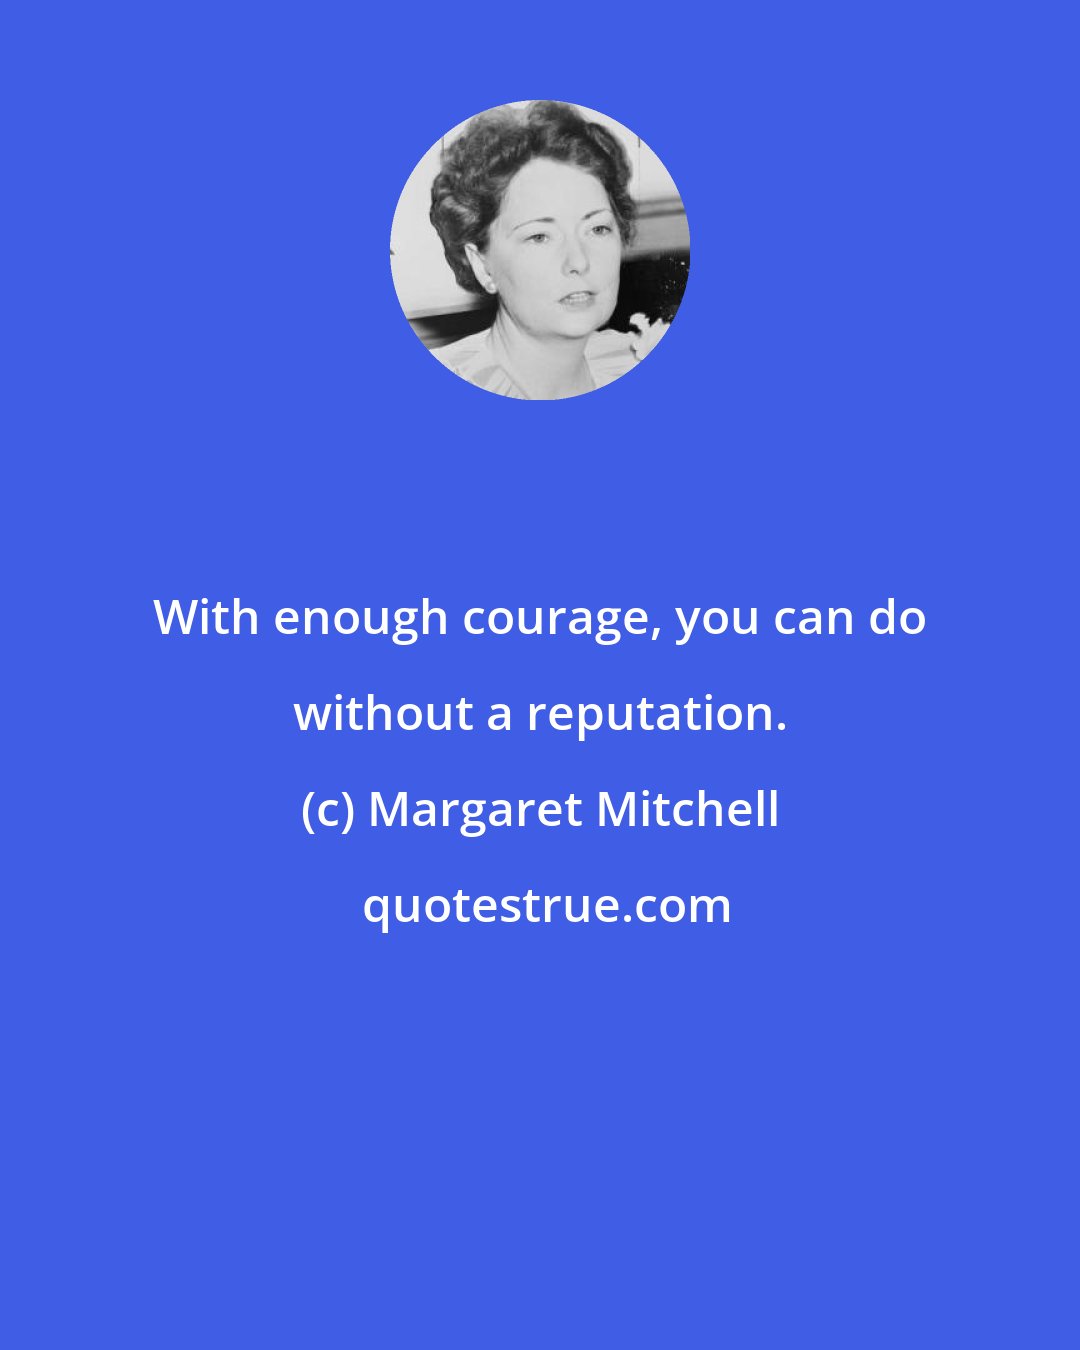 Margaret Mitchell: With enough courage, you can do without a reputation.